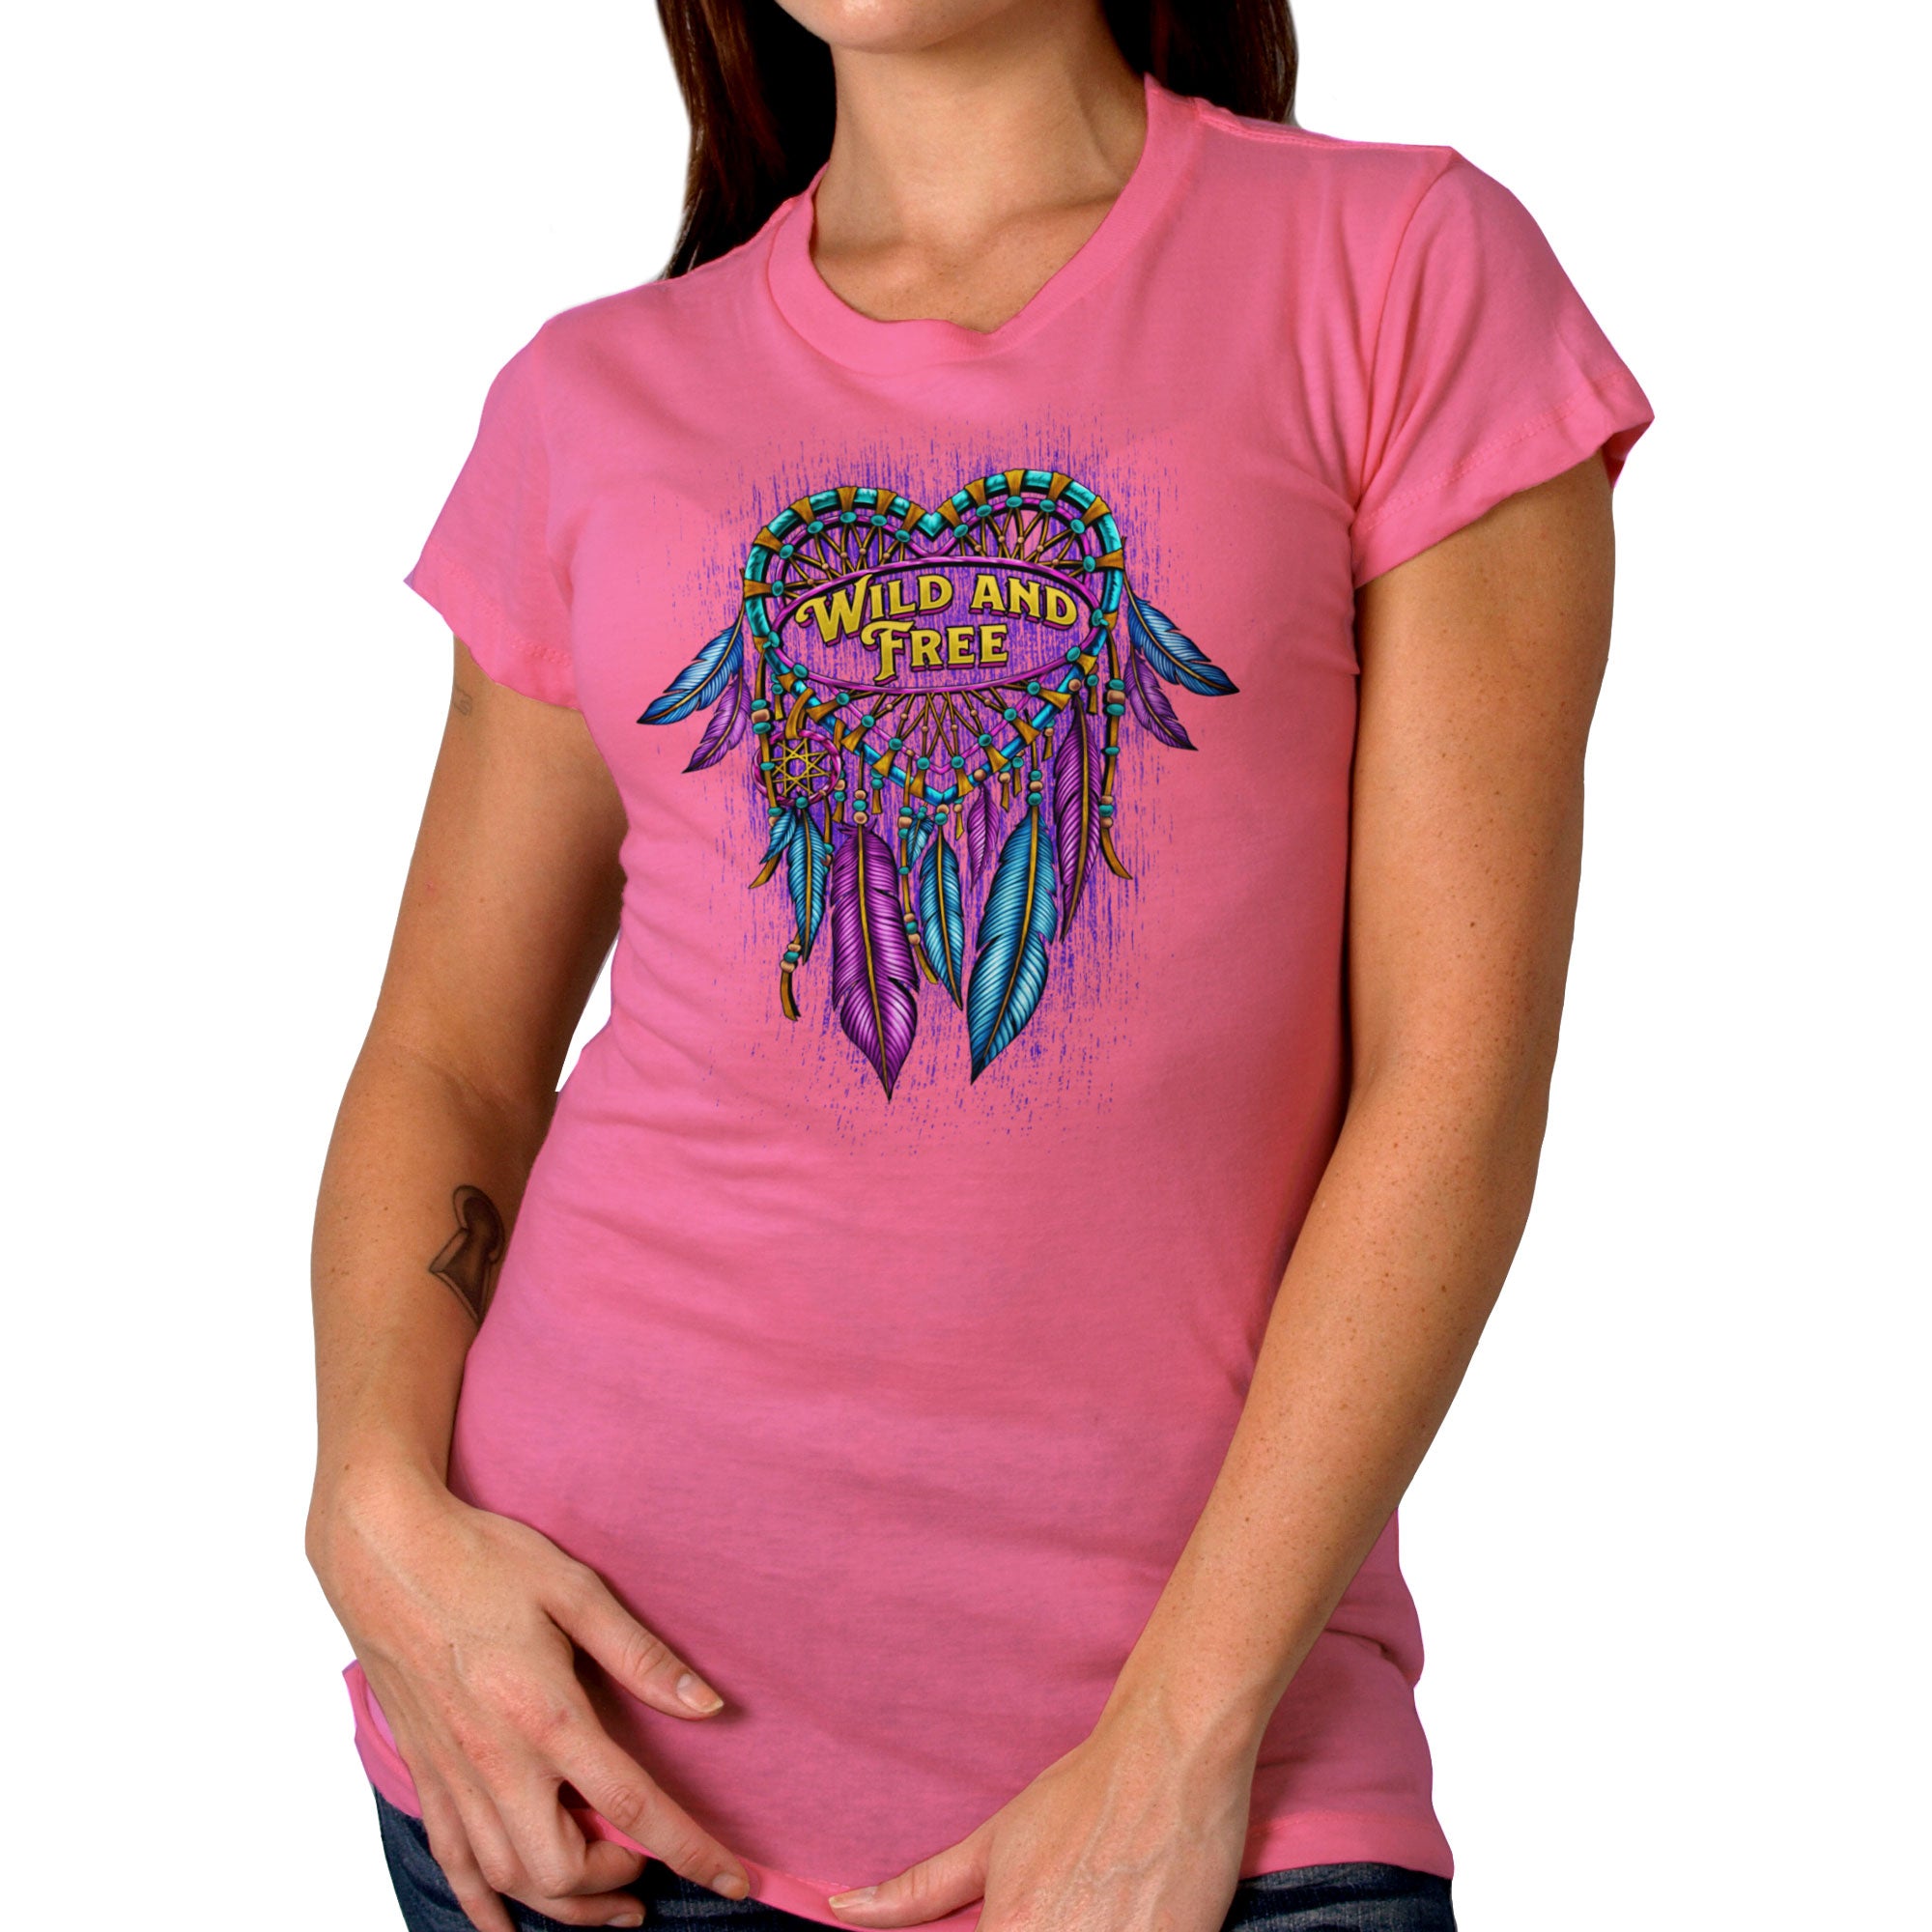 Hot Leathers Ladies Dream Wings T-Shirt